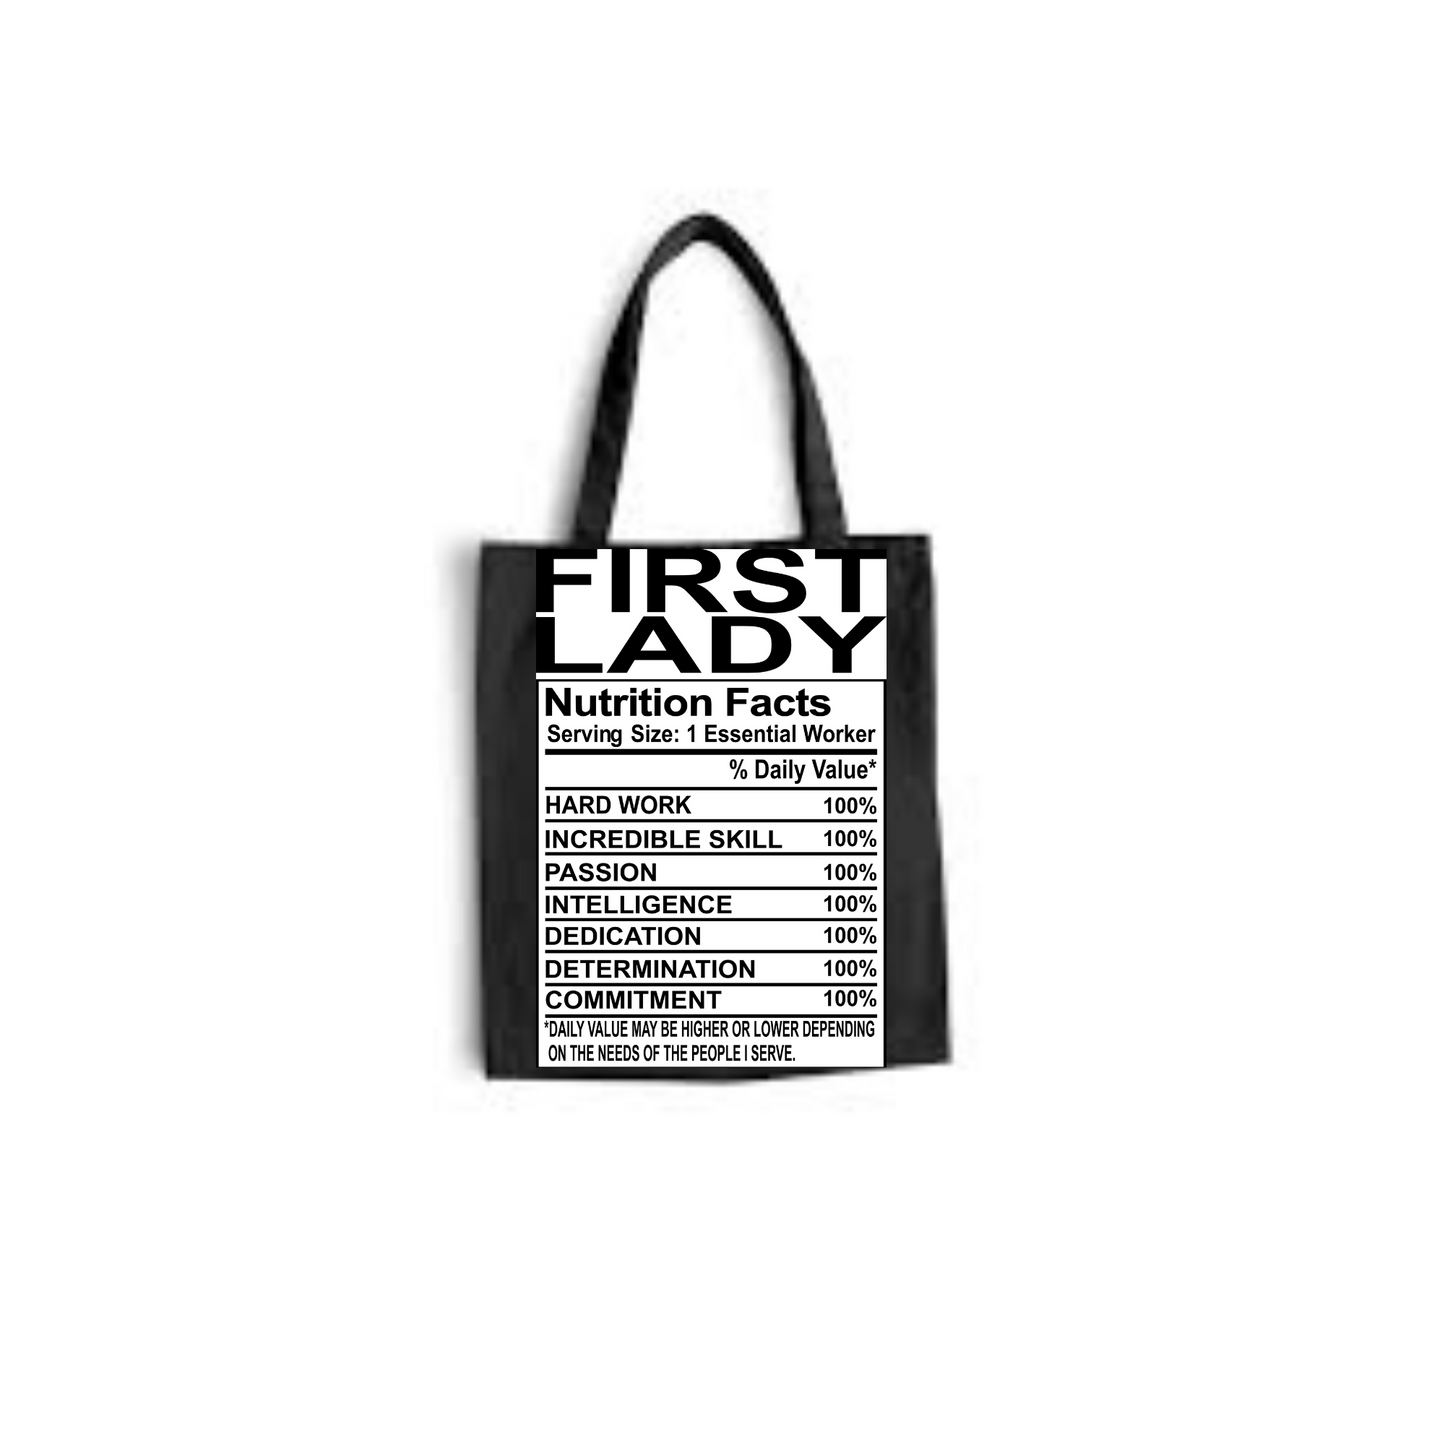 First lady tote bag